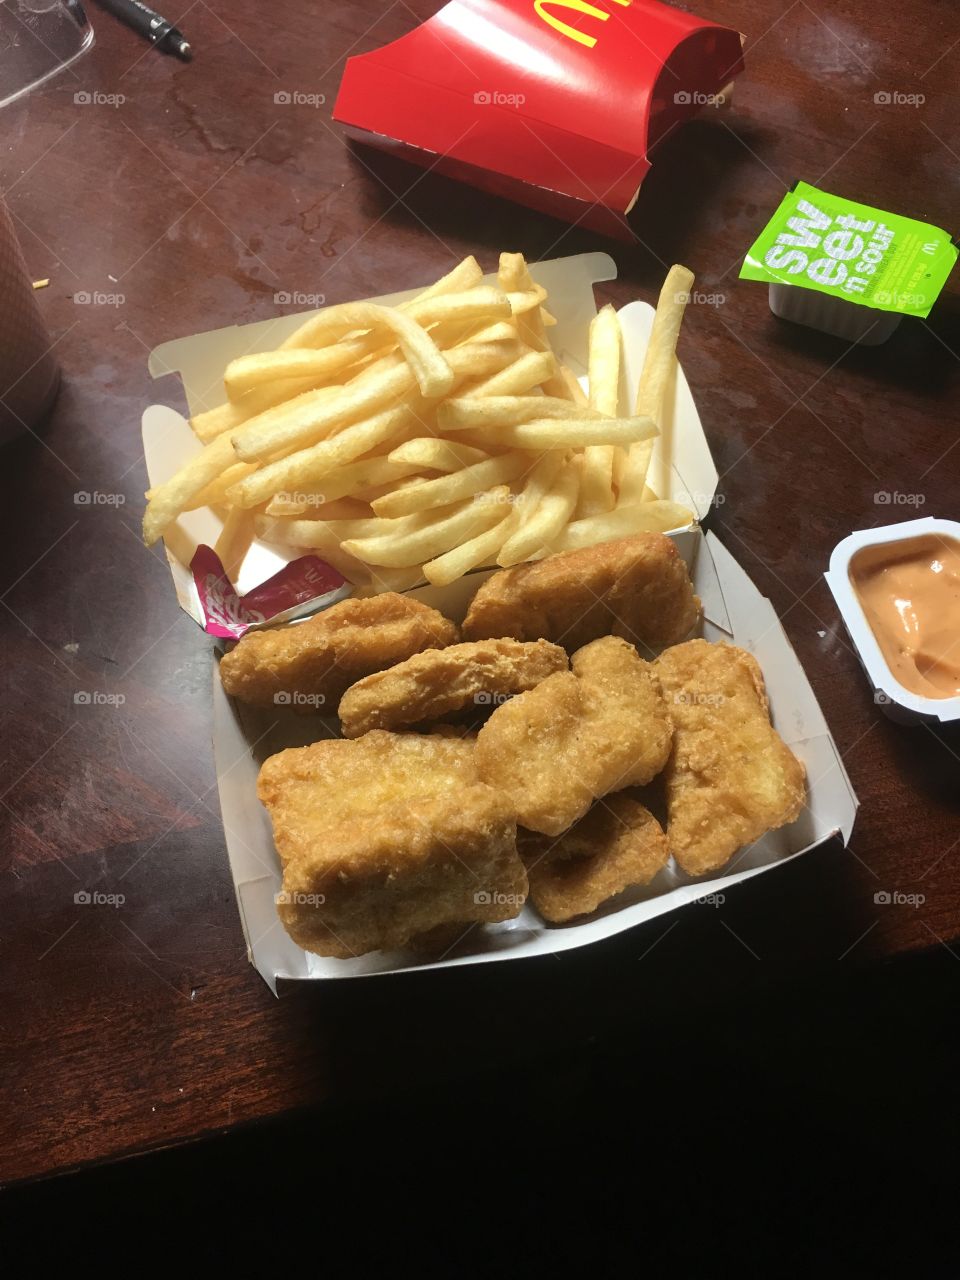 McDonalds Chicken Nuggets and Fries